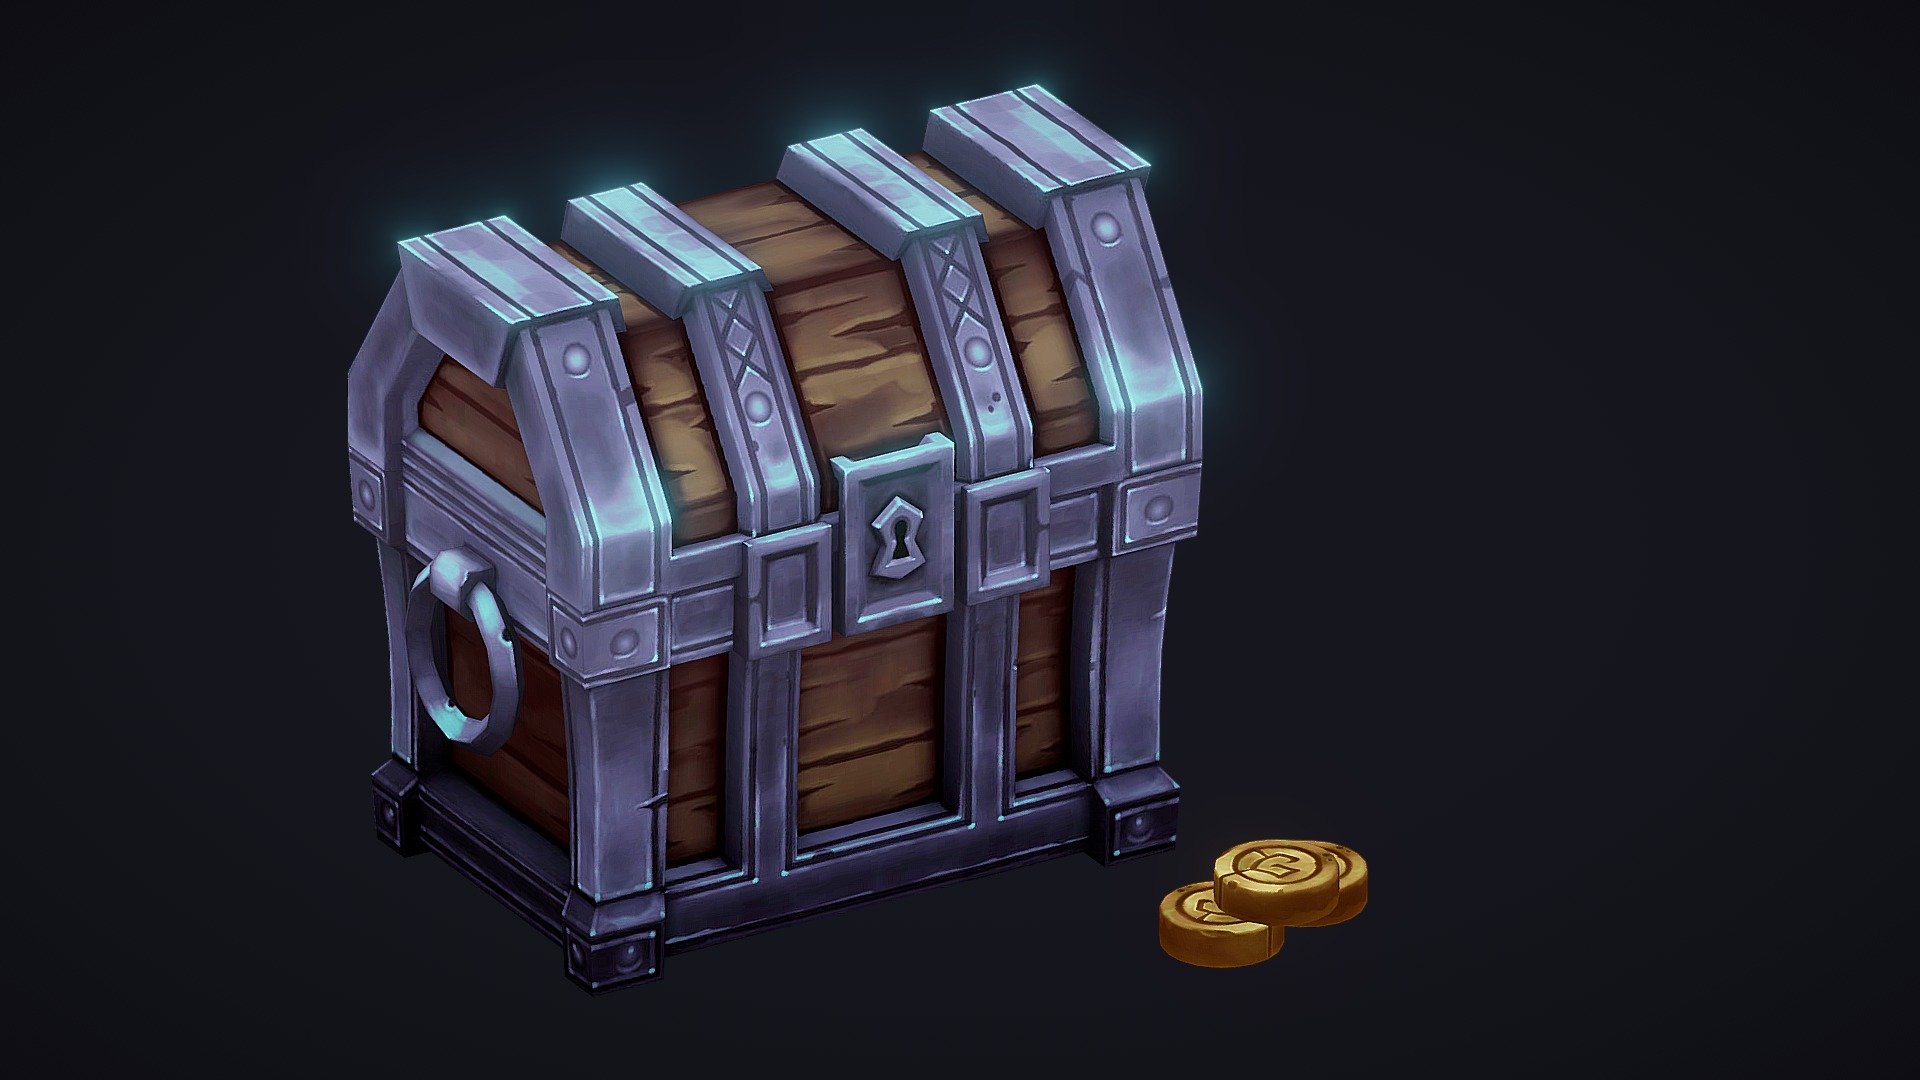 In this study I tried to make a chest using 3D coat to study Handpainted, i like a lot the process, and I hope you like the result 3d model